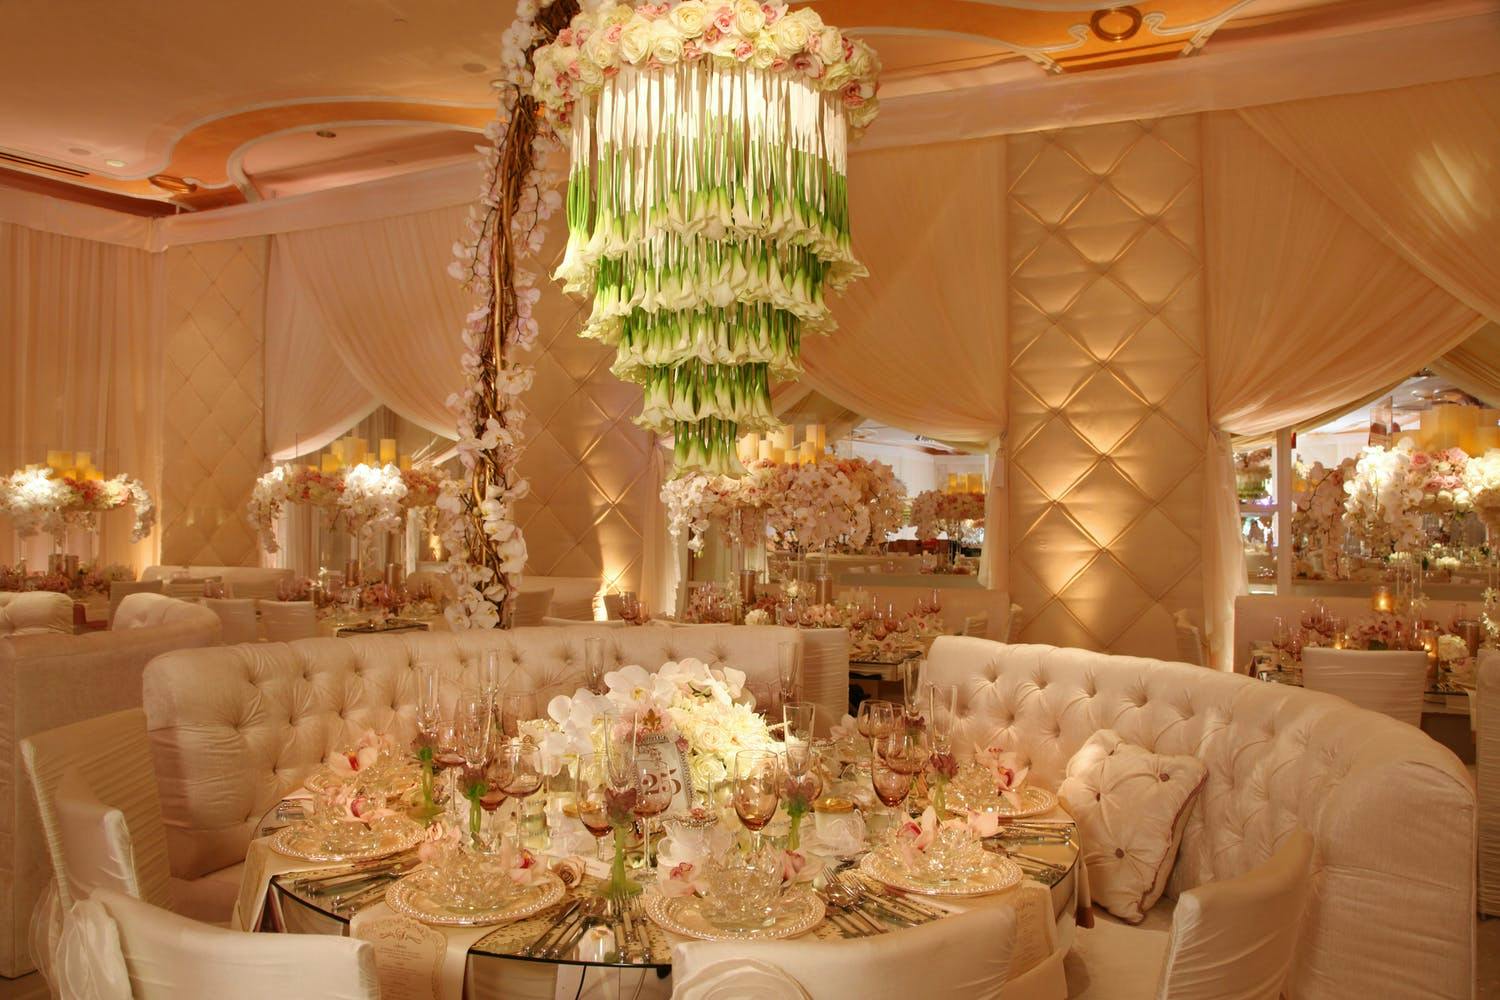 Ballroom Wedding in Peach Tones With Tulip Waterfall-Style Chandelier | PartySlate